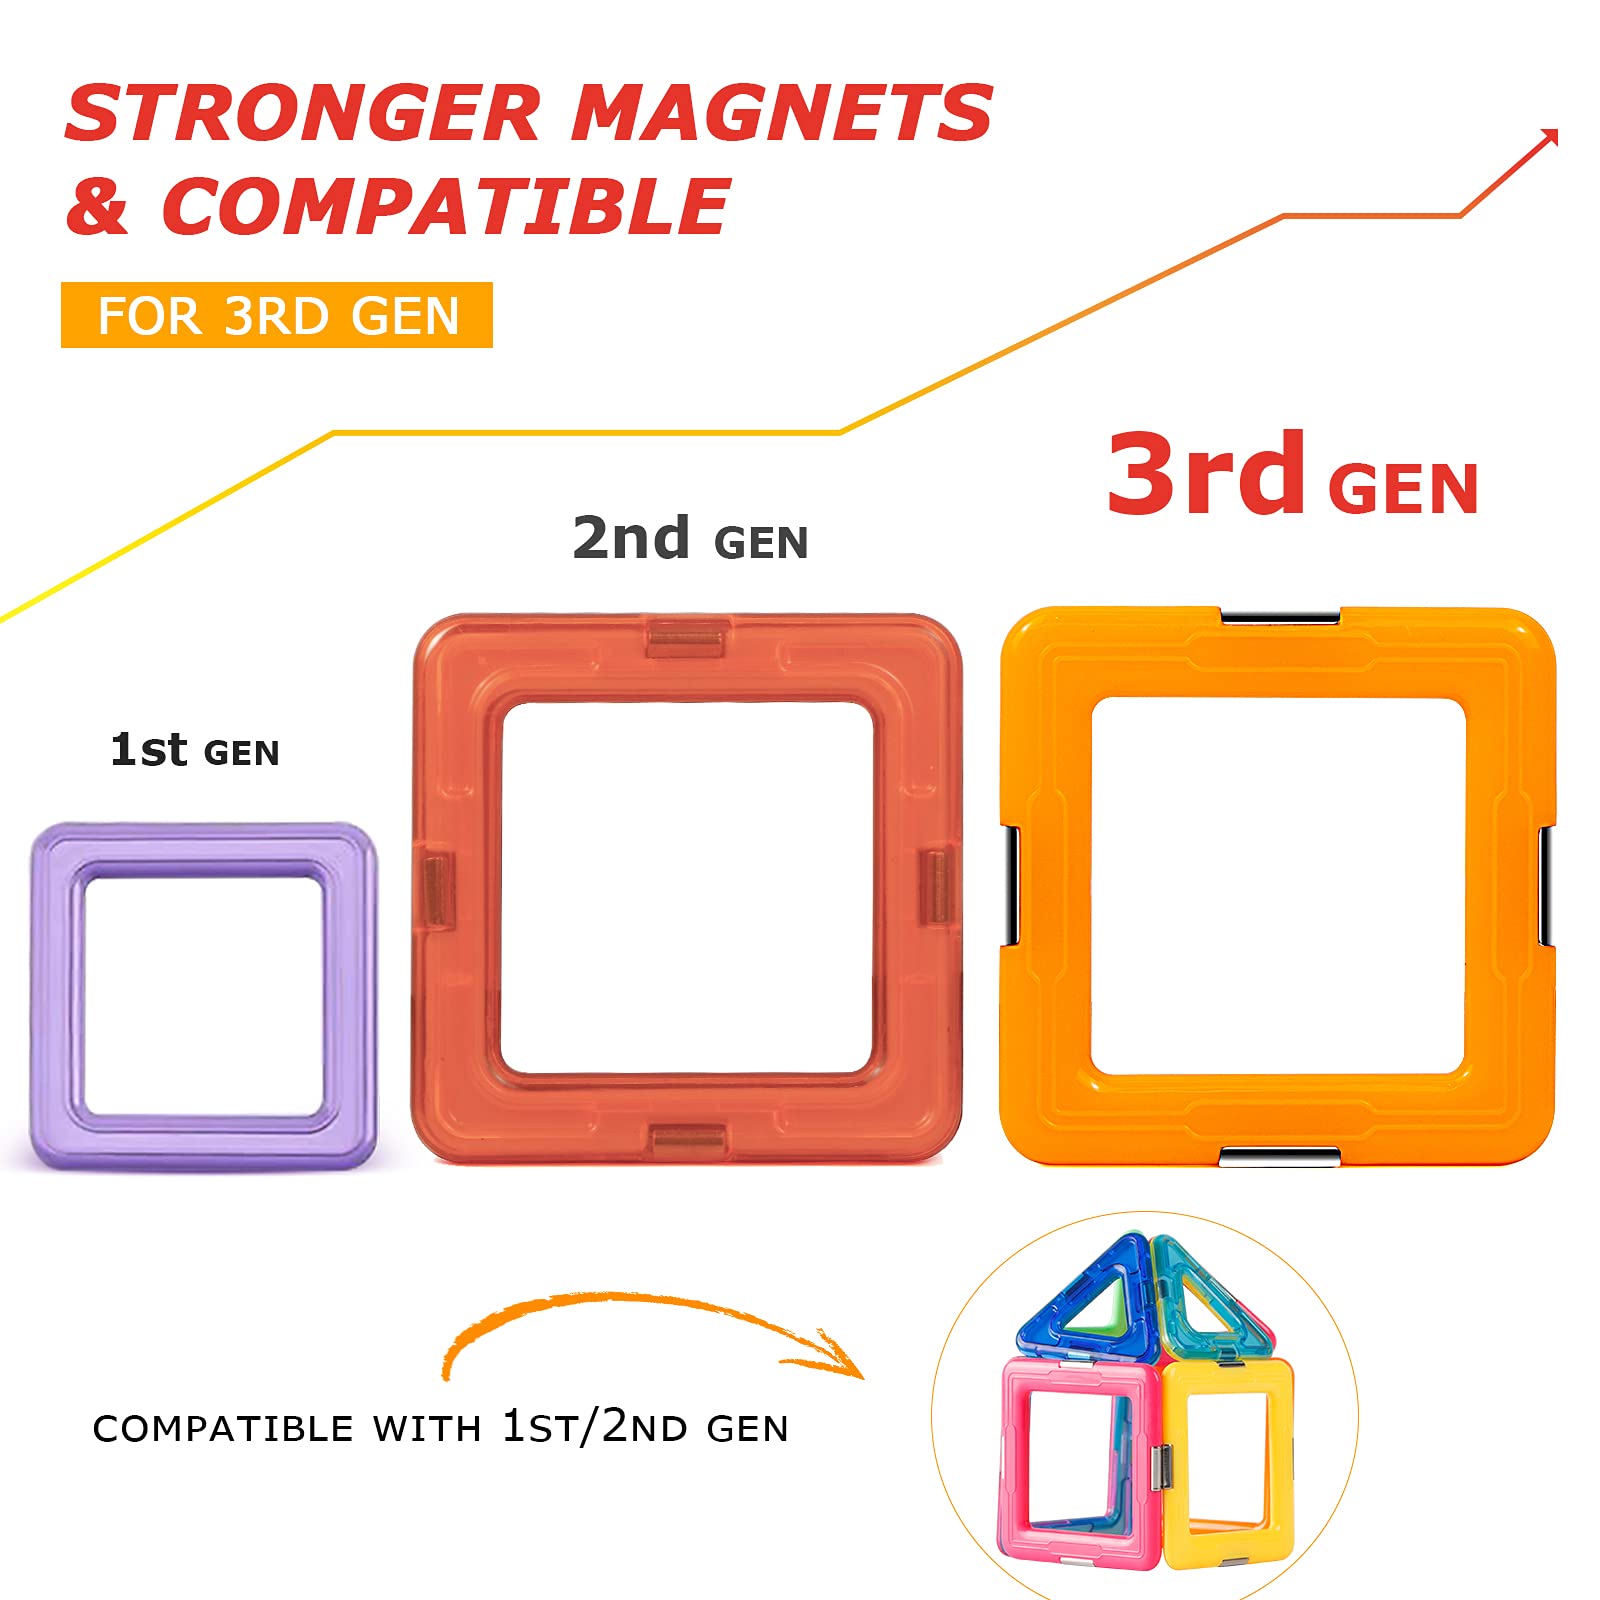 Upgraded Magnetic Blocks Tough Building Tiles STEM Toys for 3+ Year Old Boys and Girls Learning by Playing Games for Toddlers Kids Toys Compatible with Major Brands Building Blocks - Starter Set